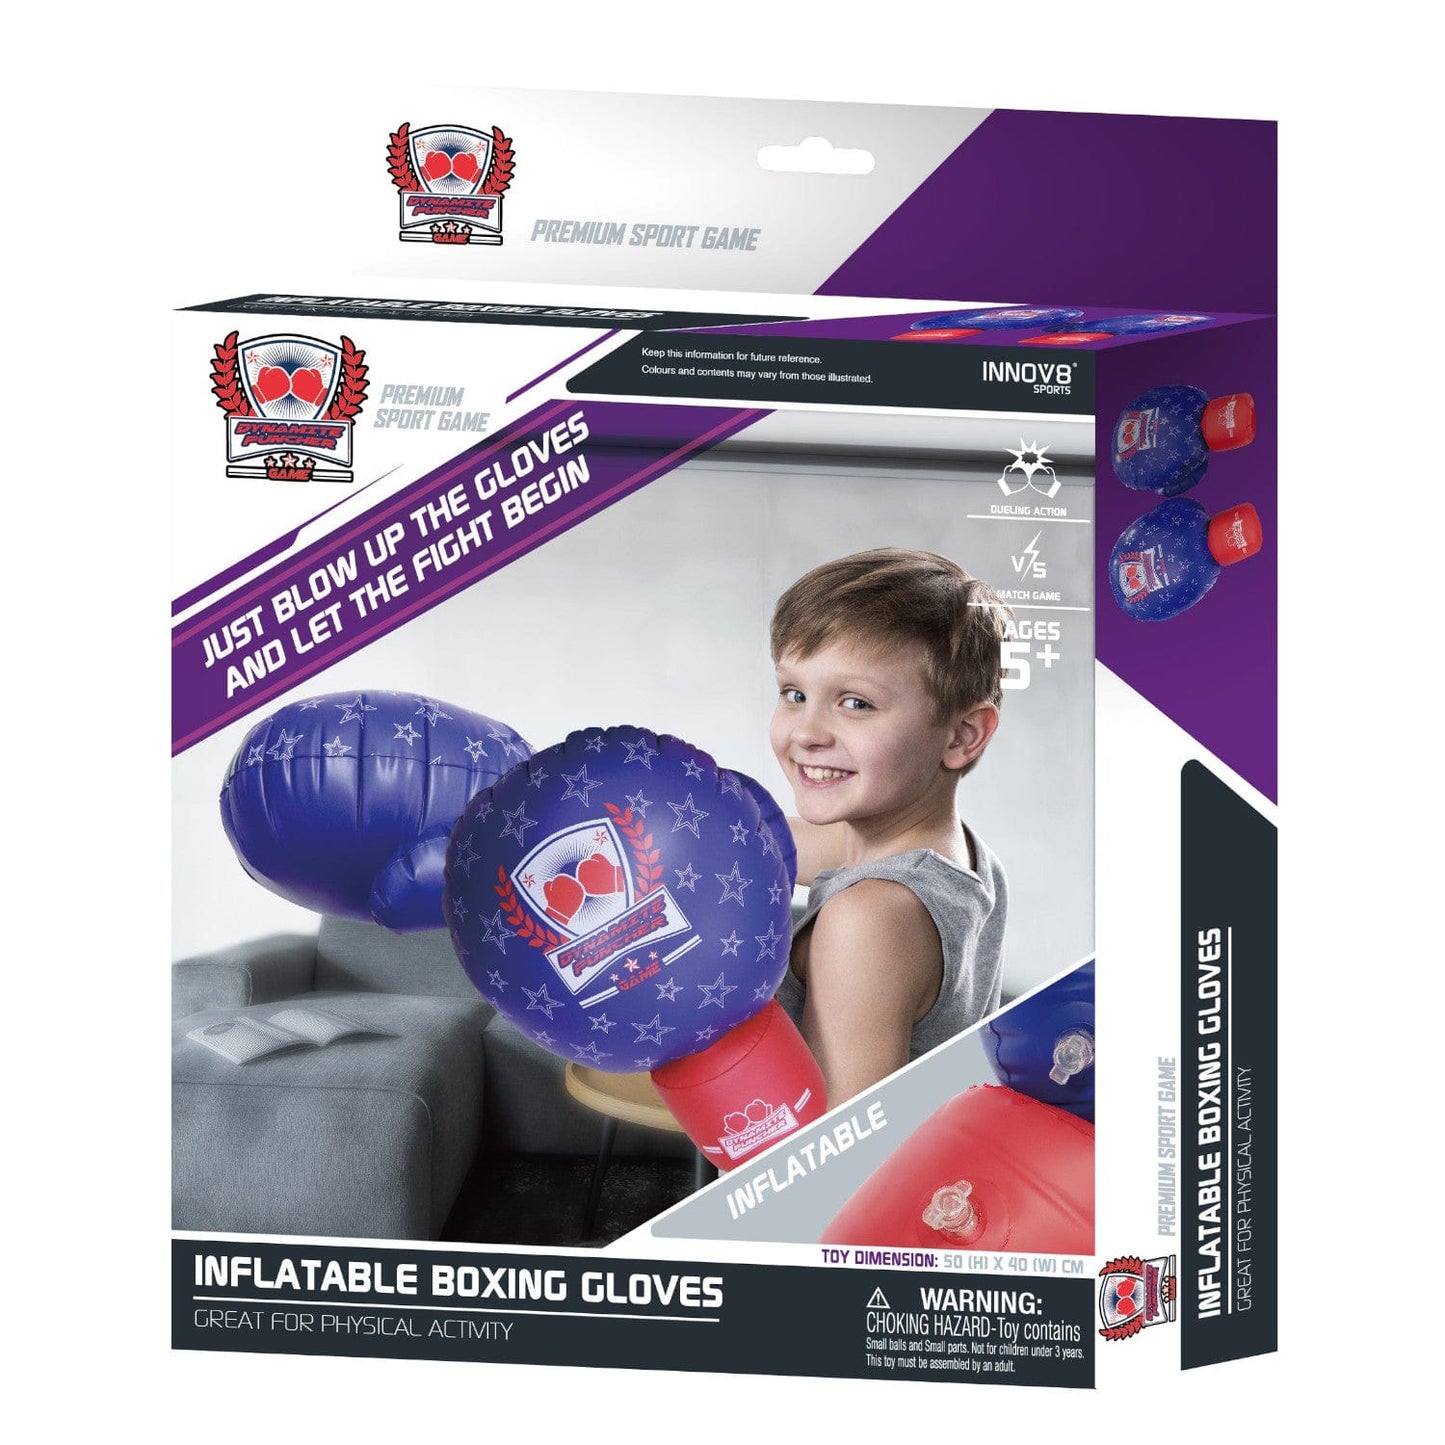 Hatim Toys Inflatable Boxing Gloves